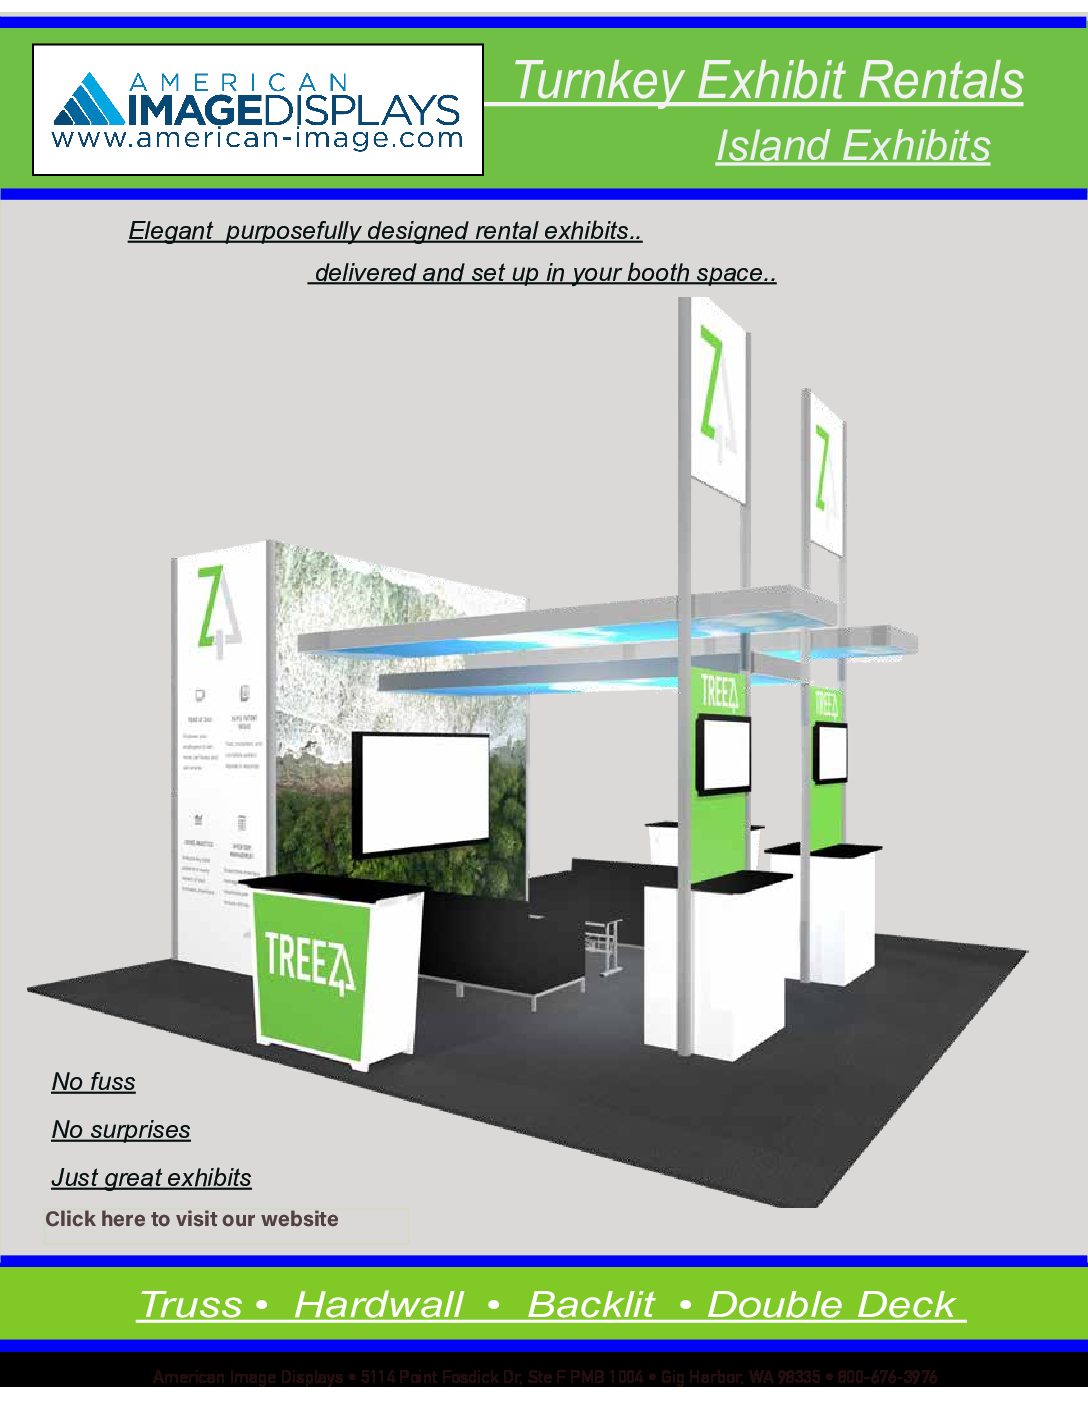 Turnkey Rental of Island Trade Show Booths